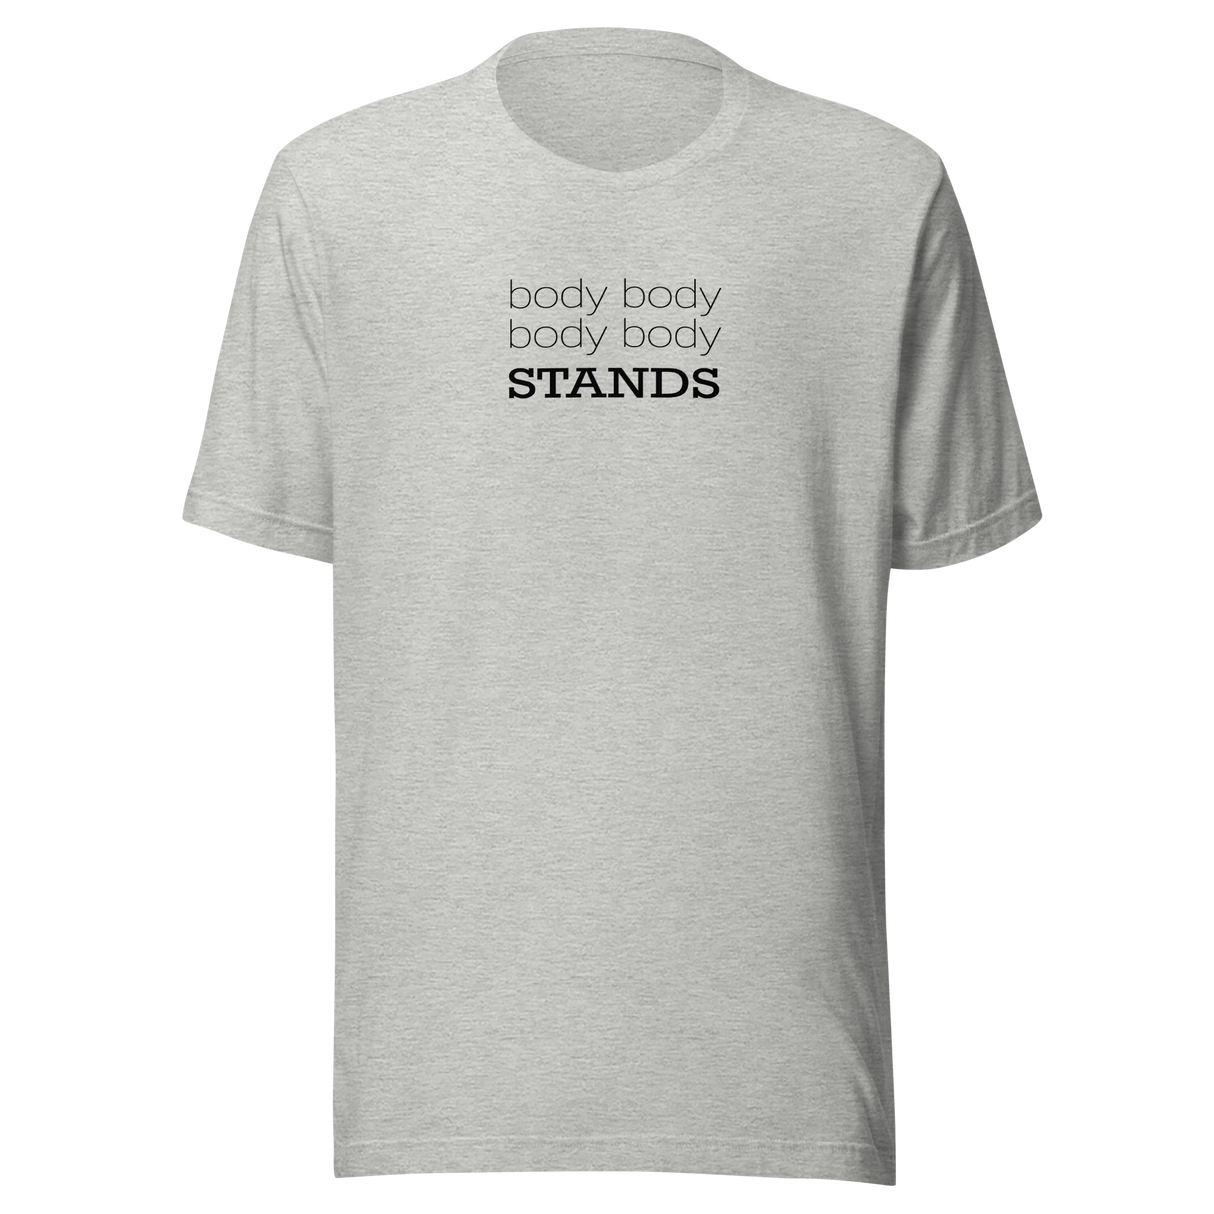 body-body-body-body-understands-philosophy-tee-funny-t-shirt-cool-tee-funny-t-shirt-mind-games-tee#color_athletic-heather